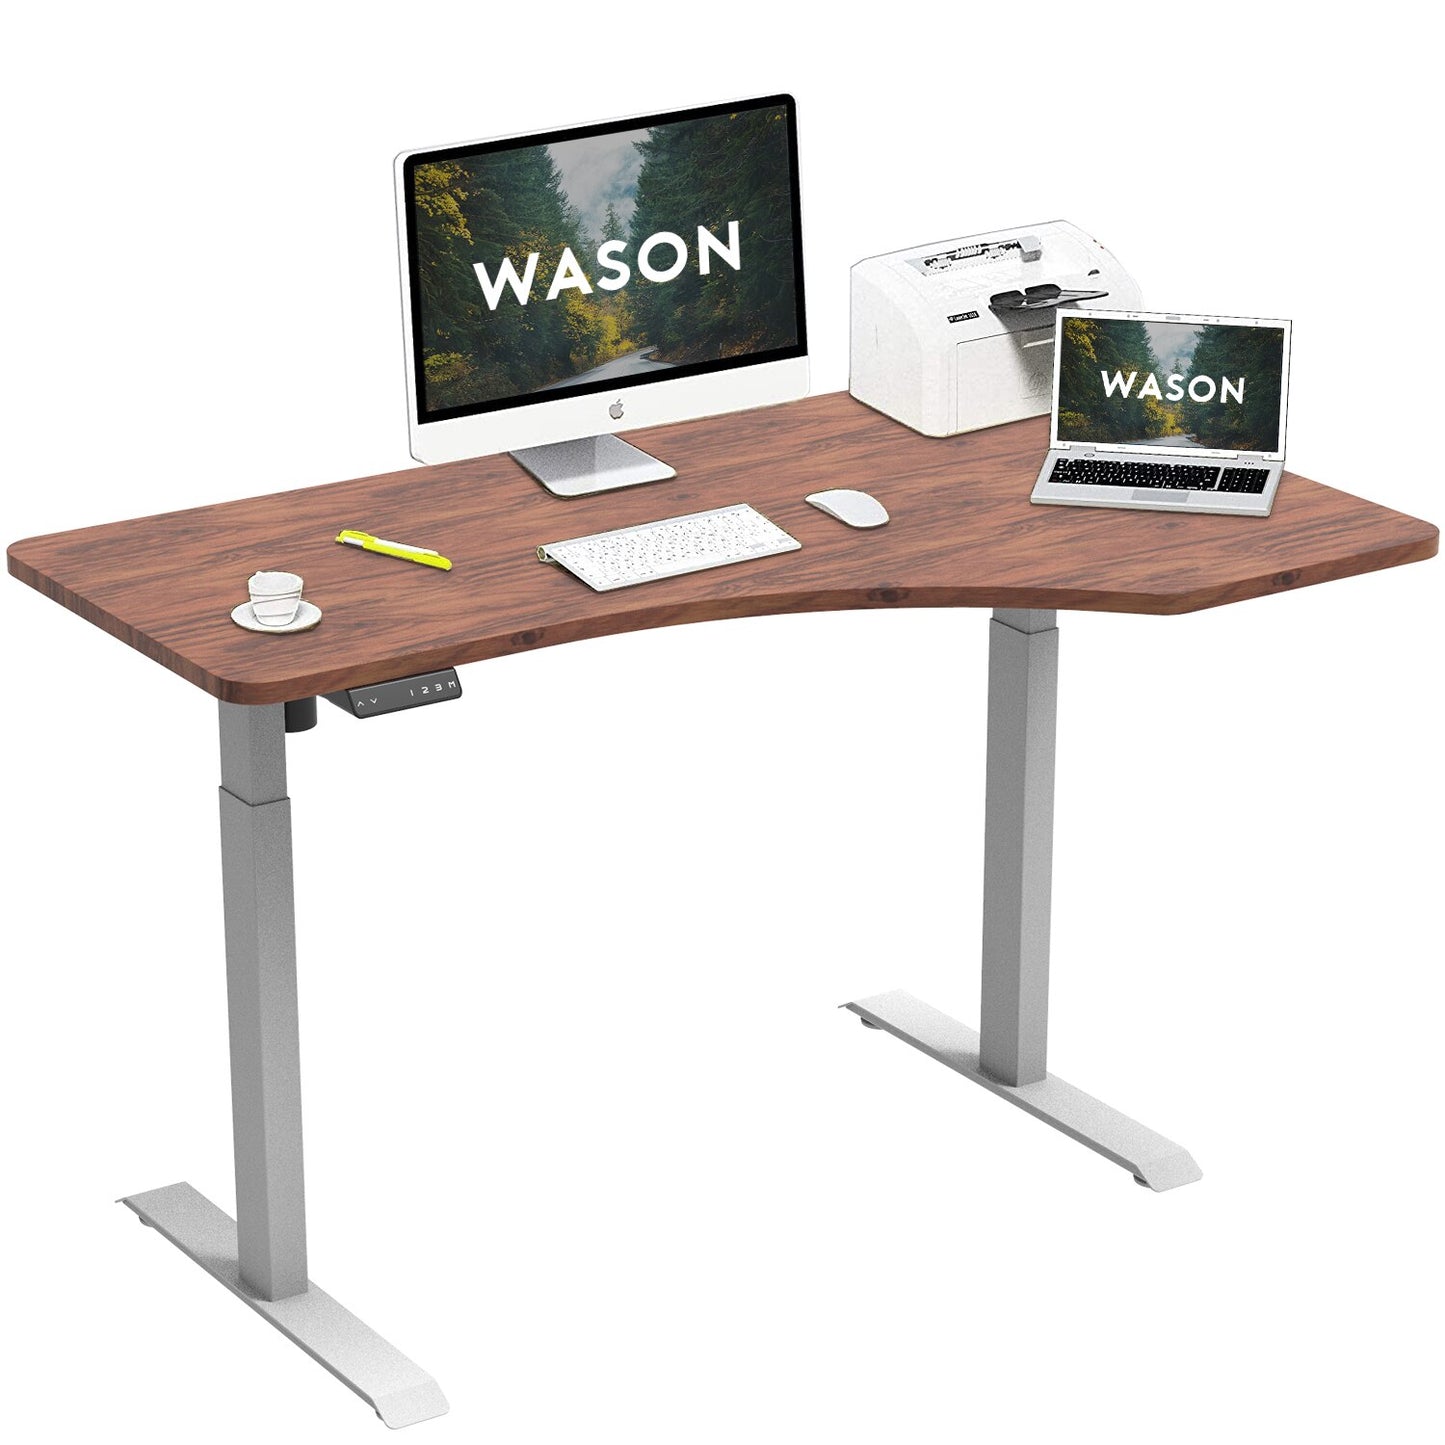 Ergonomic Electric Stand Up Desk Legs Adjustable Electric Table Lift Desk Height Adjustable Electric Lift Table